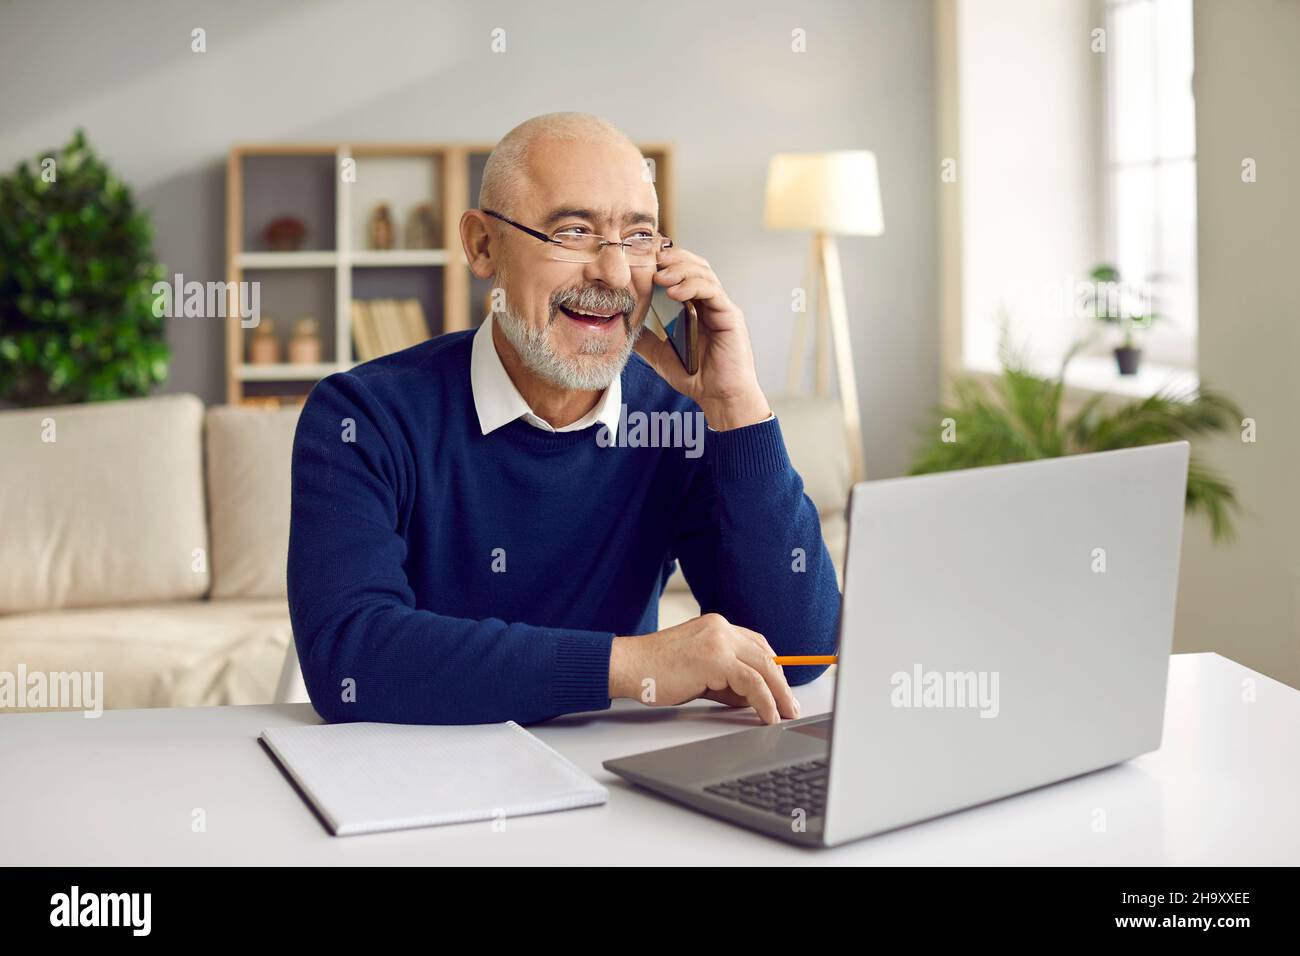 Senior business man talking on cell phone sitting in front of laptop in home office. Stock Photo